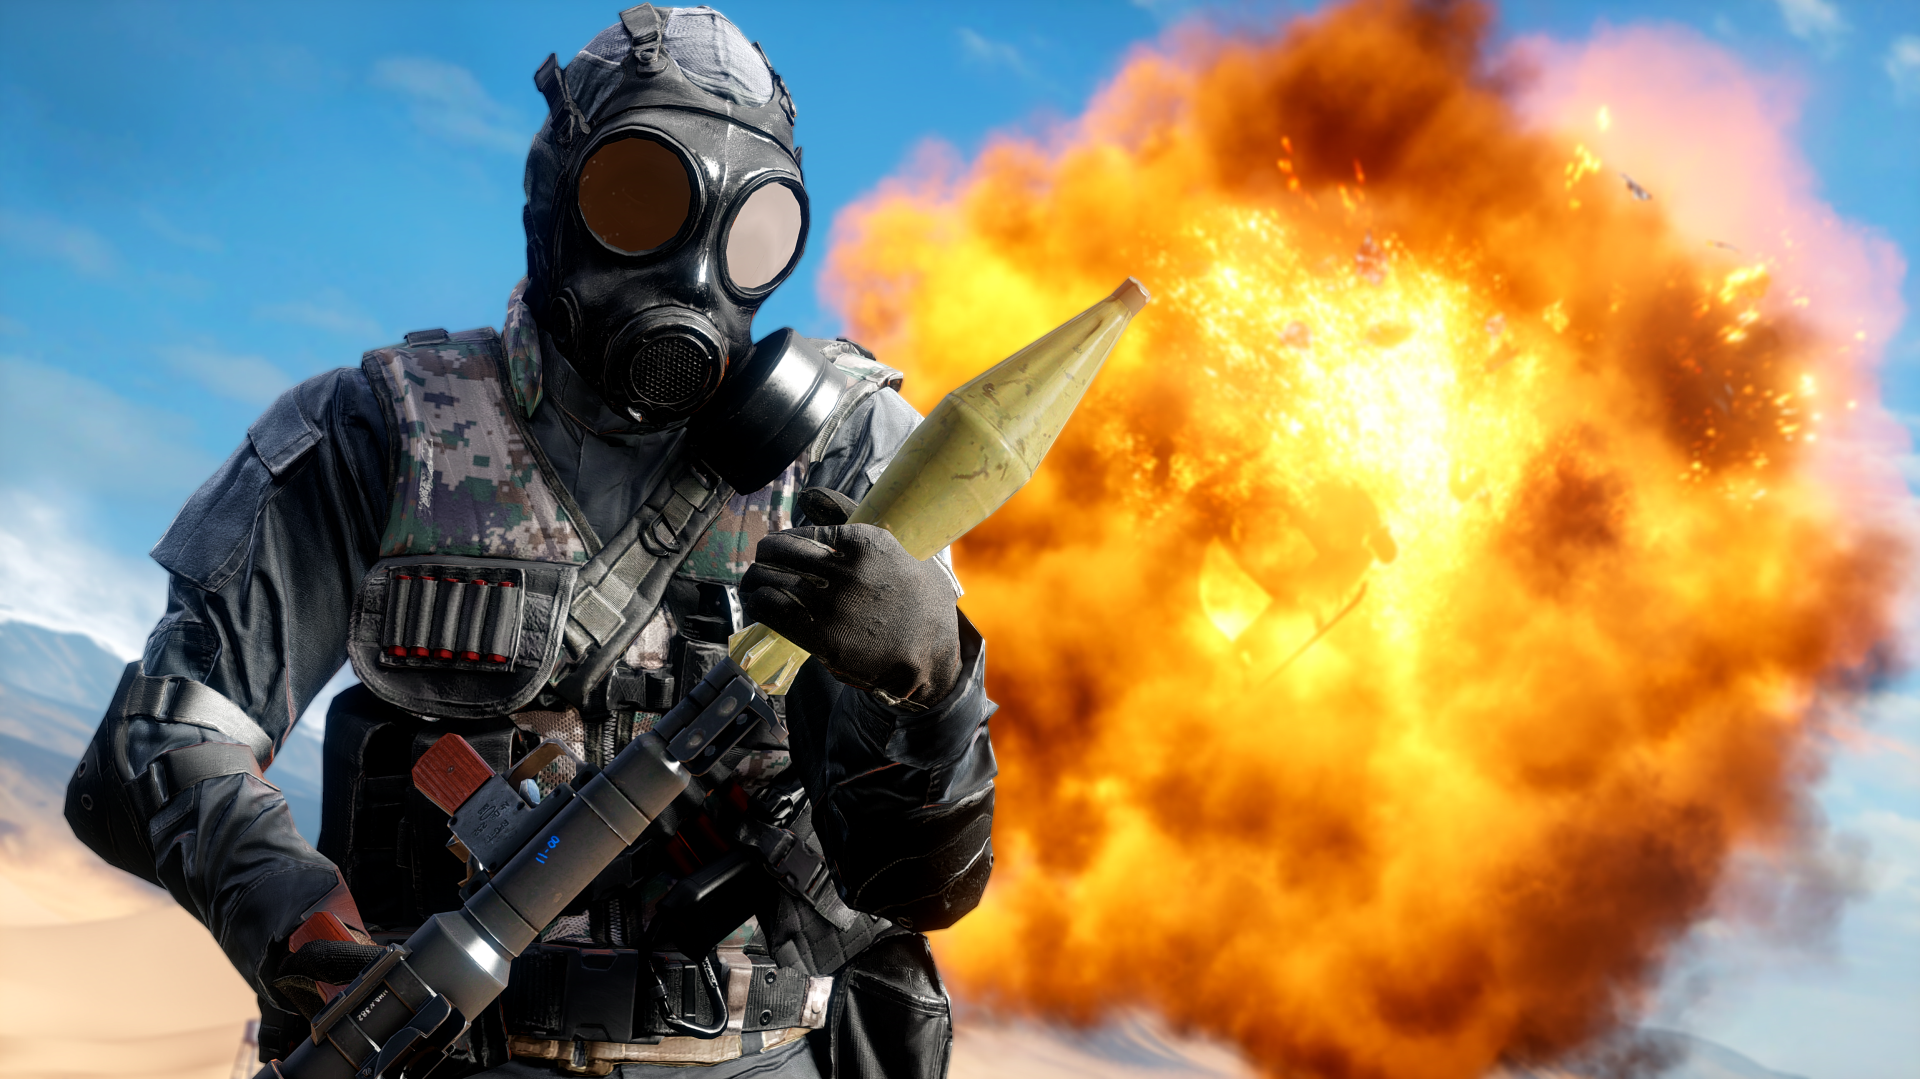 launcher wallpaper hd,action adventure game,shooter game,personal protective equipment,pc game,gas mask